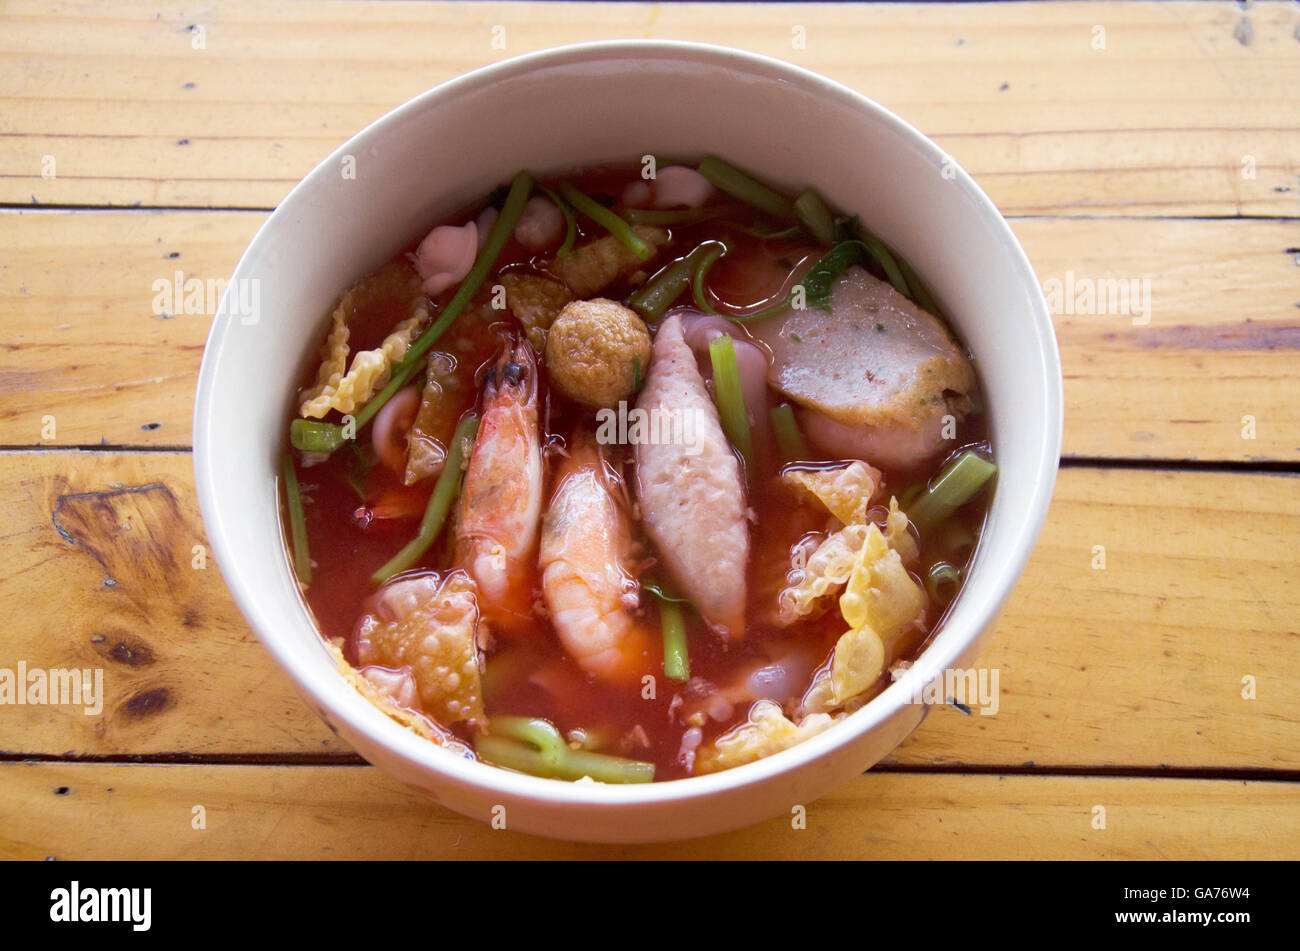 Yong tau foo or Pink seafood flat noodles called yentafo in Thailand Stock Photo